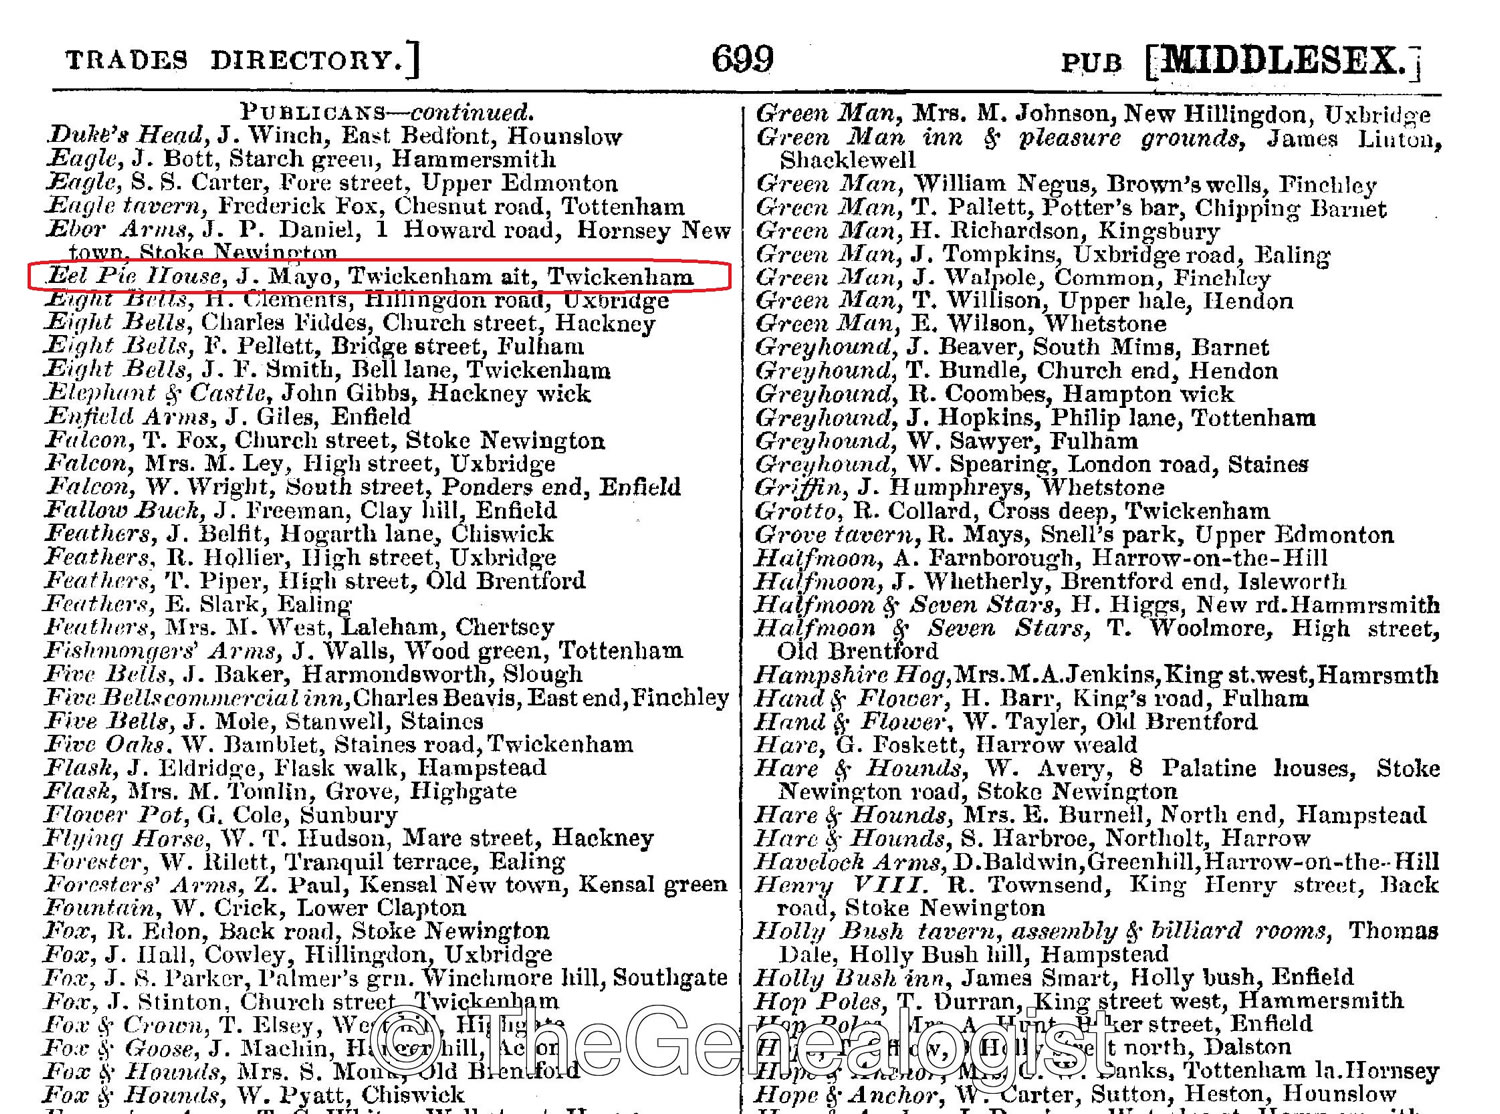 1862 Post Office Directory